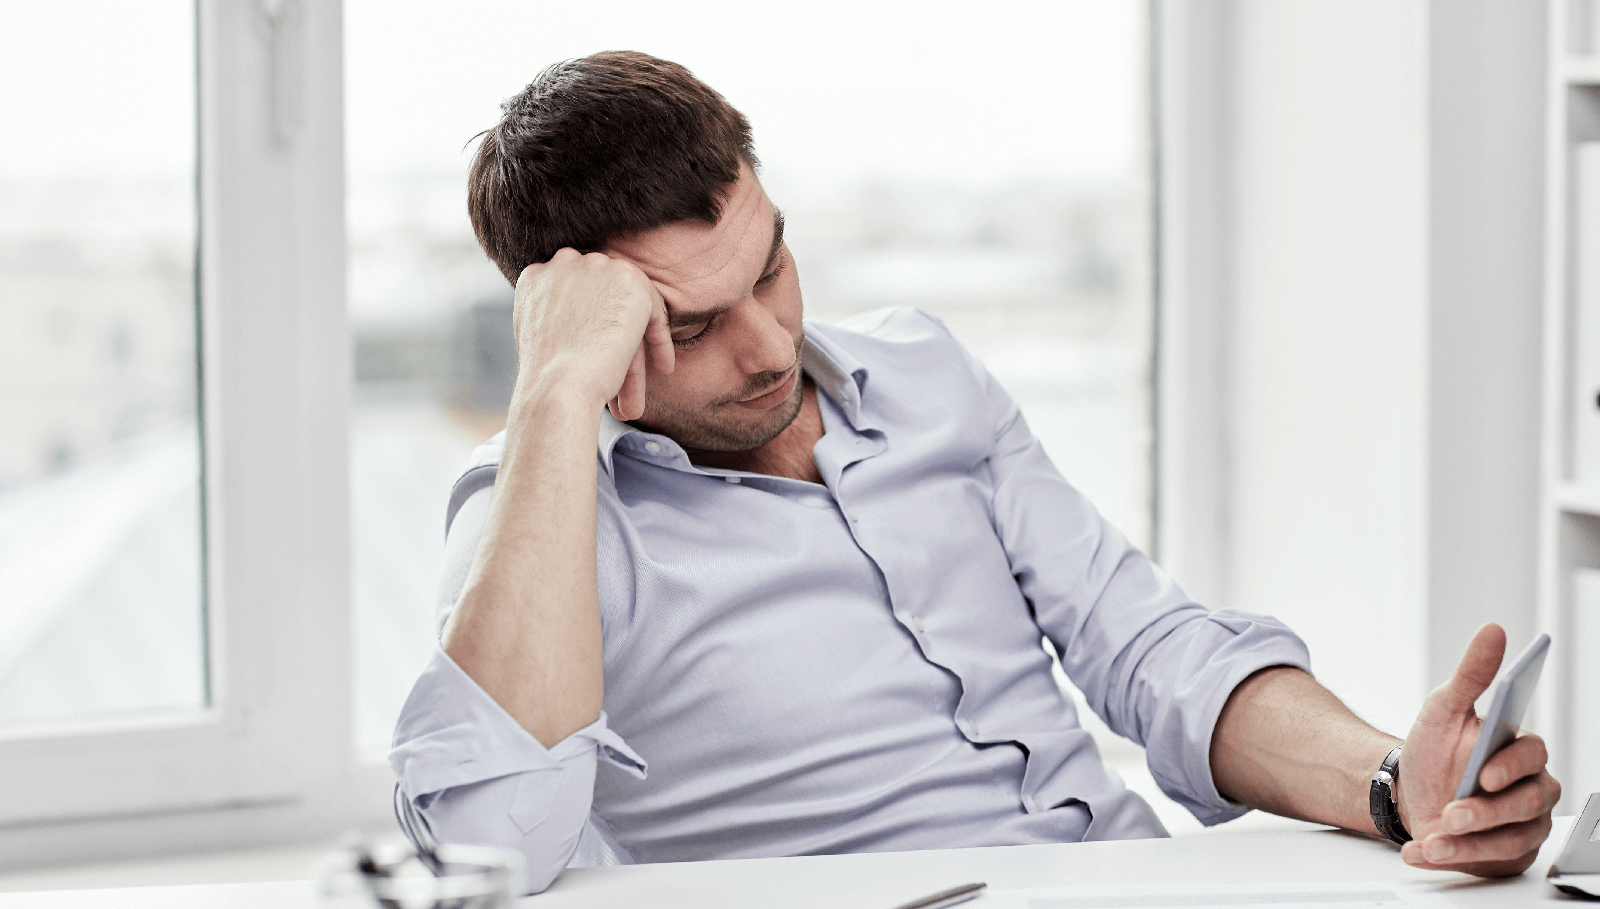 disengaged millennial considers a more fulfilling career move